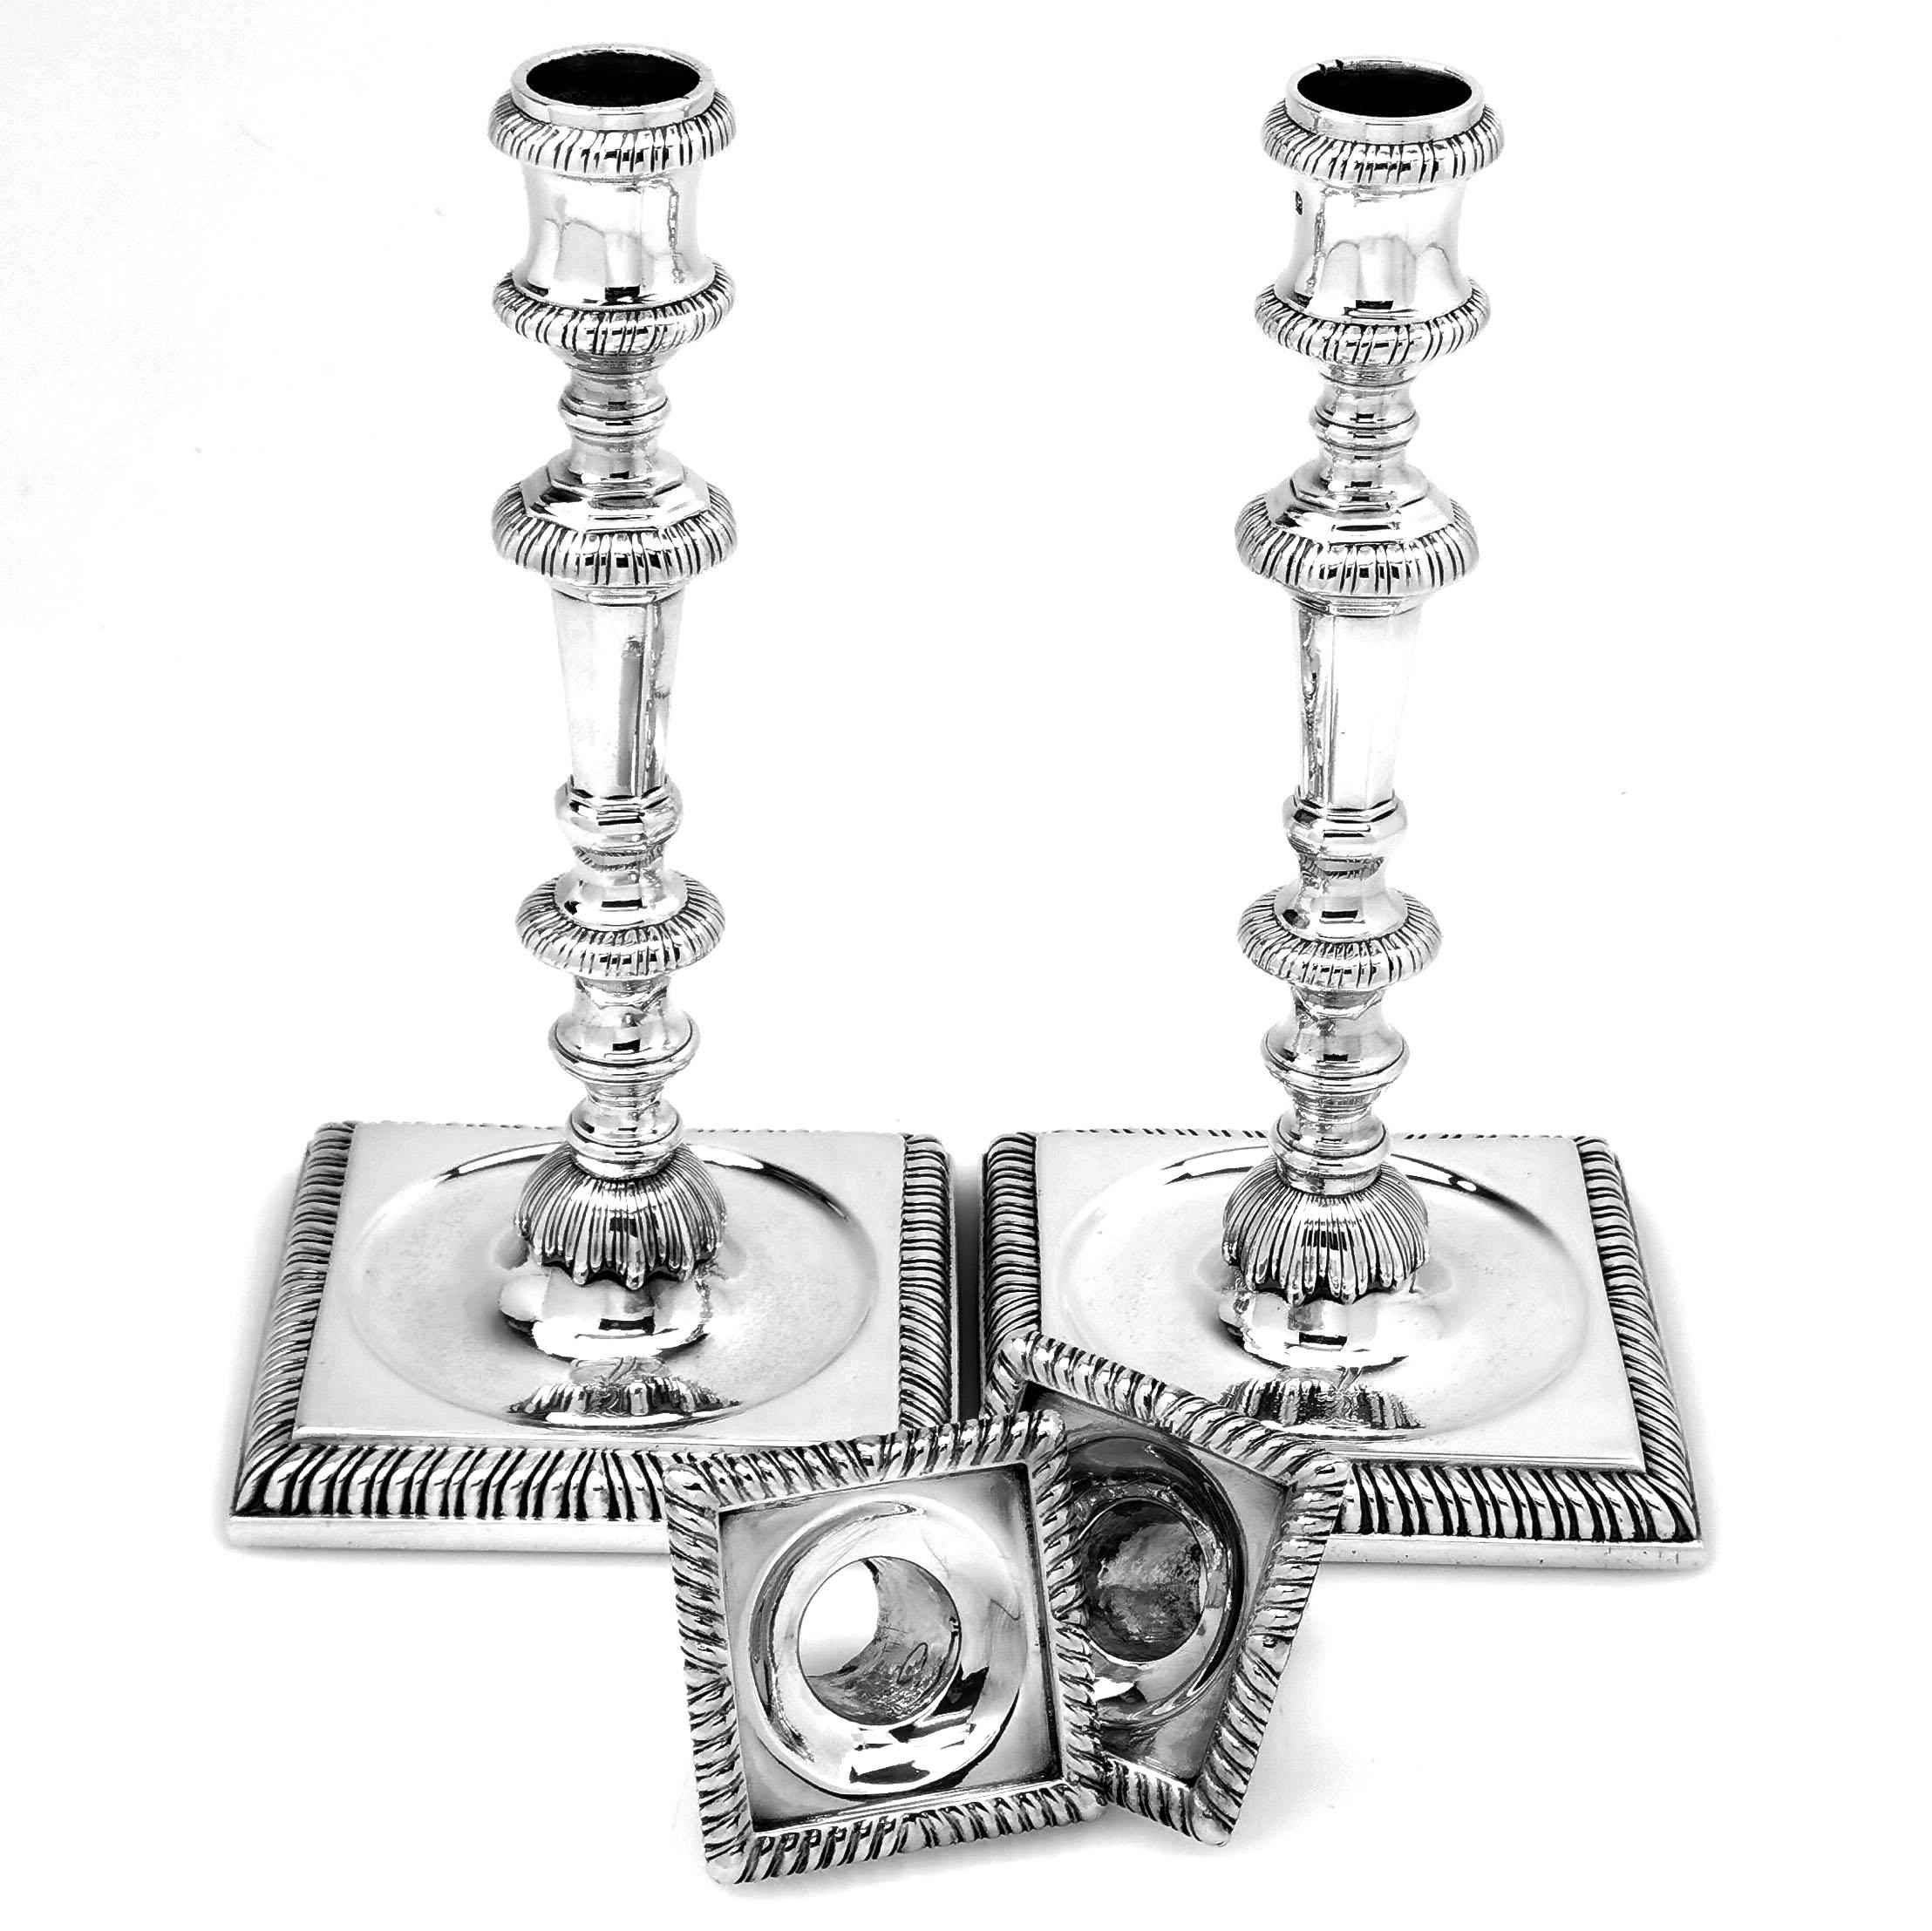 English Pair of Antique George II Sterling Silver Candlesticks 1755